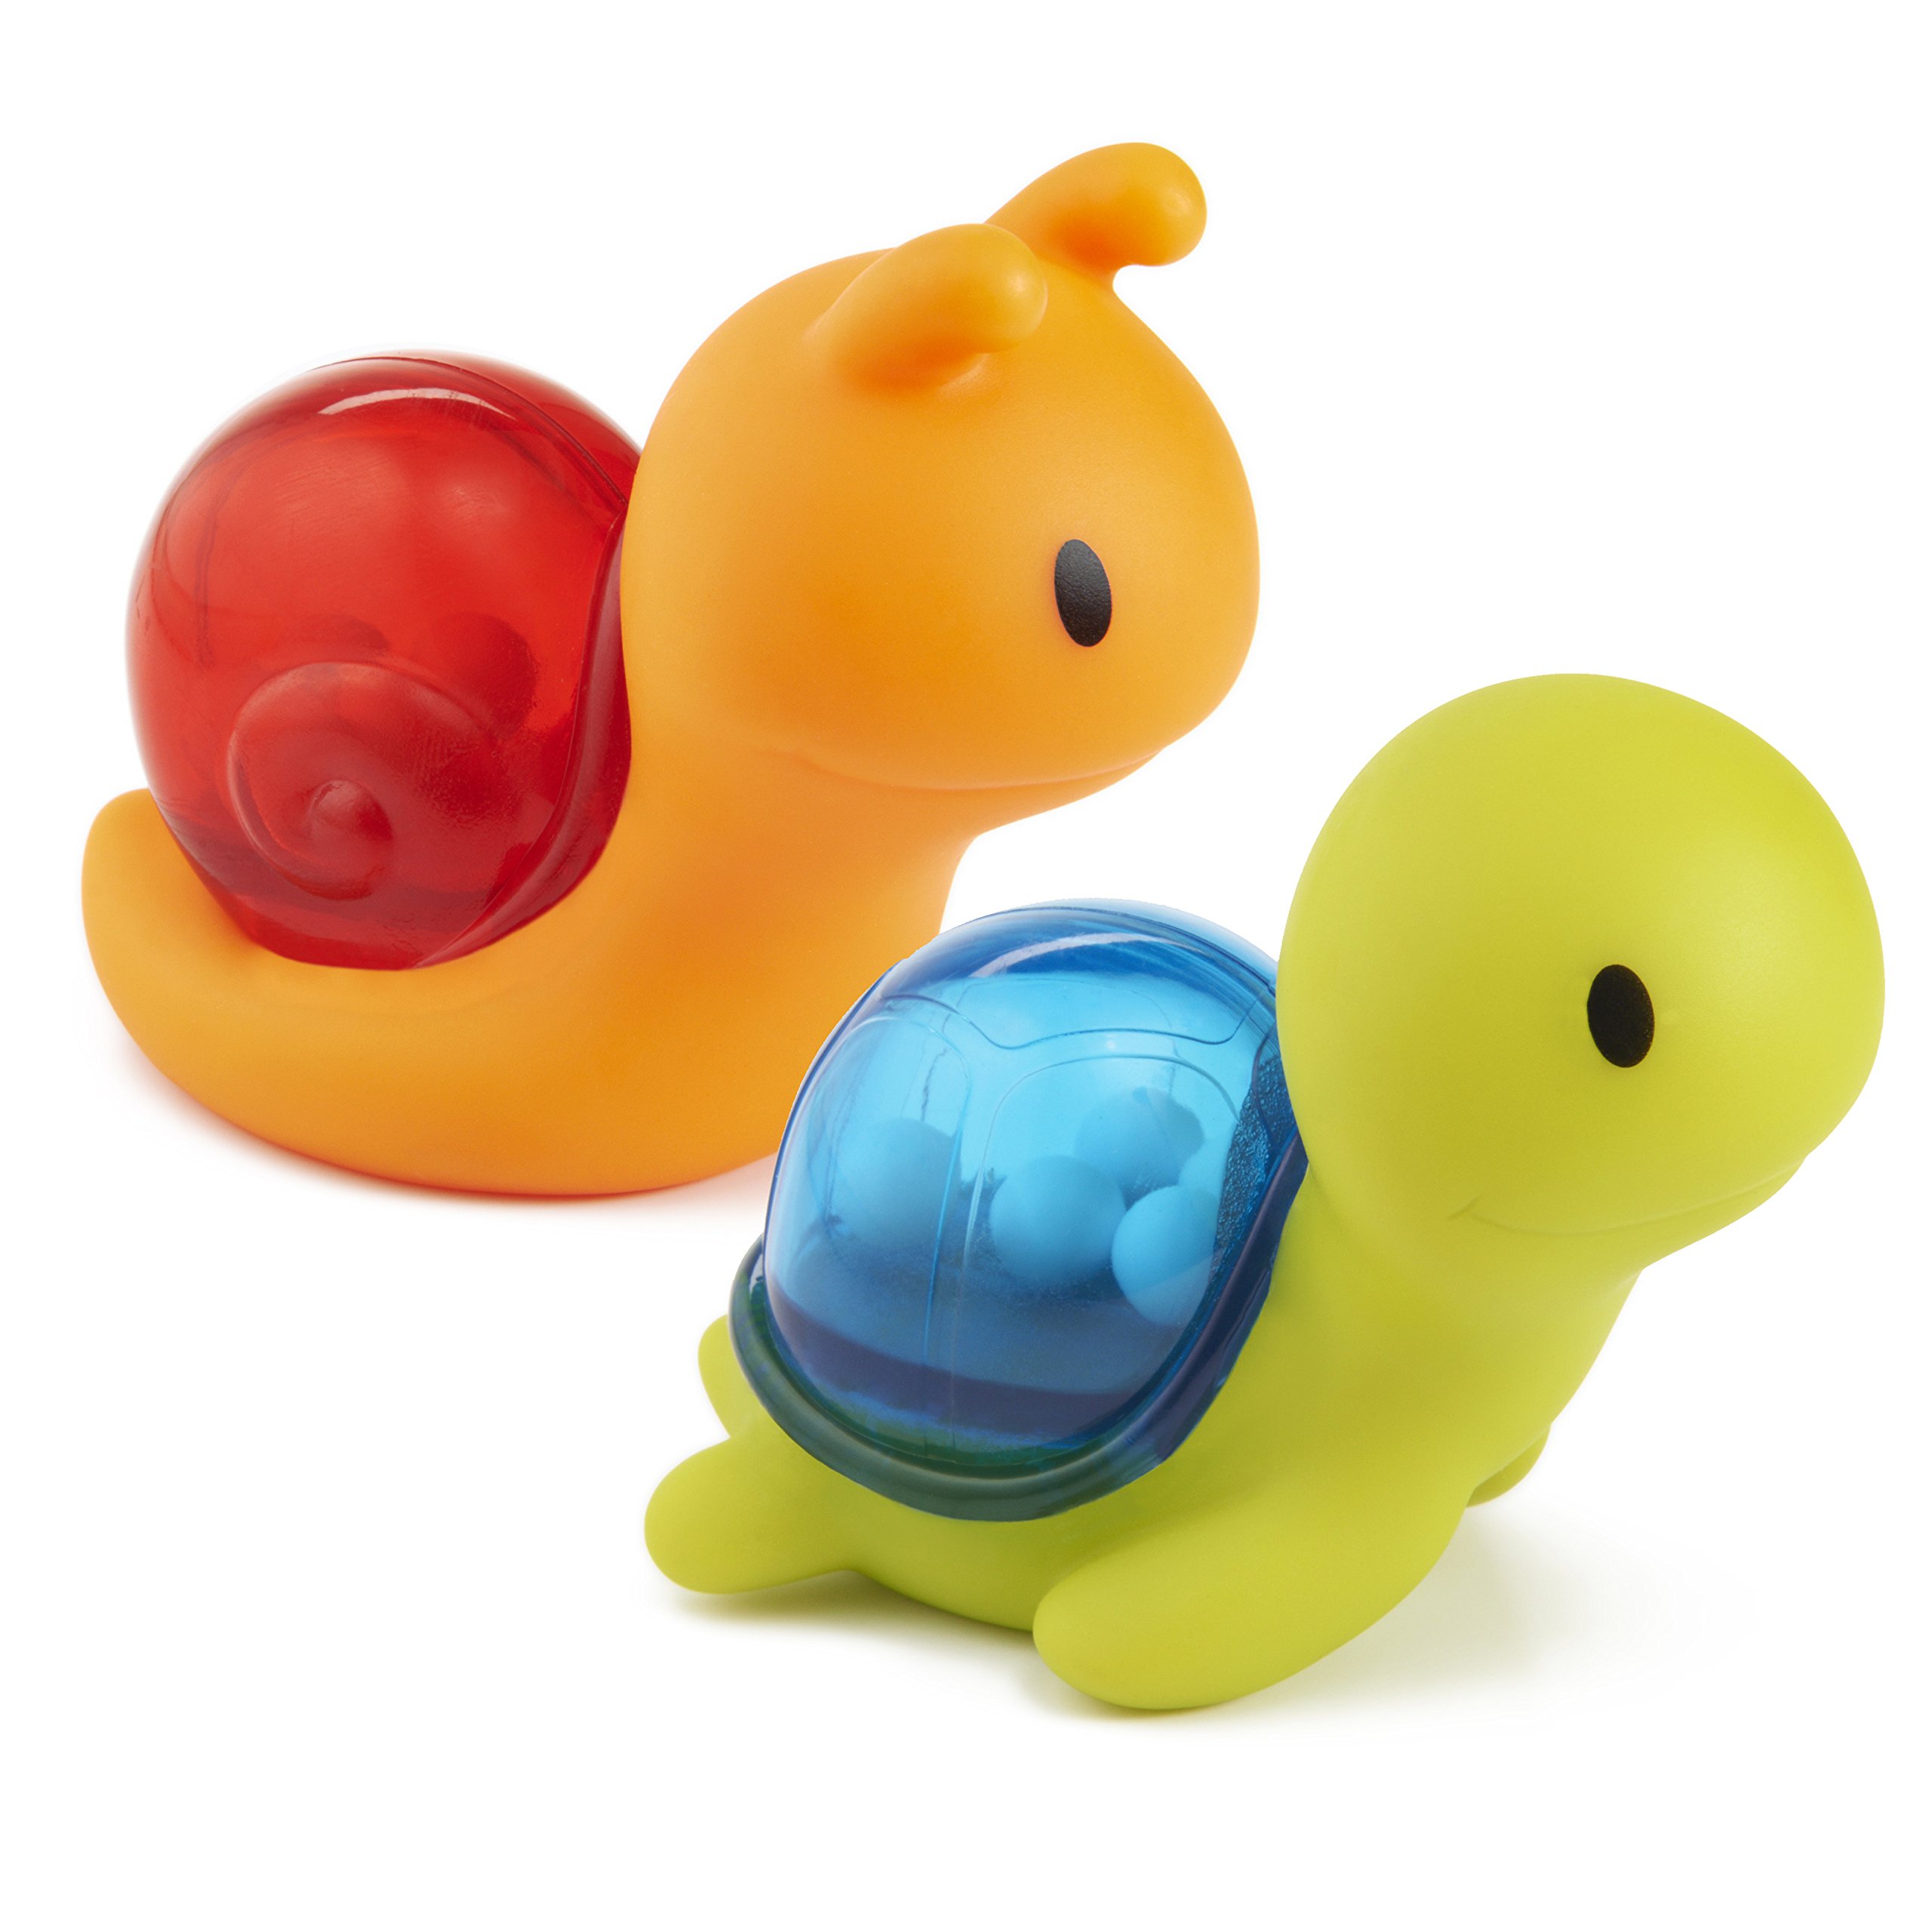 Munchkin® Bath Rattle Squirts - Fun Sensory Bath Learning Toys for Babies and Toddlers, Turtle and Snail, 2 Pack